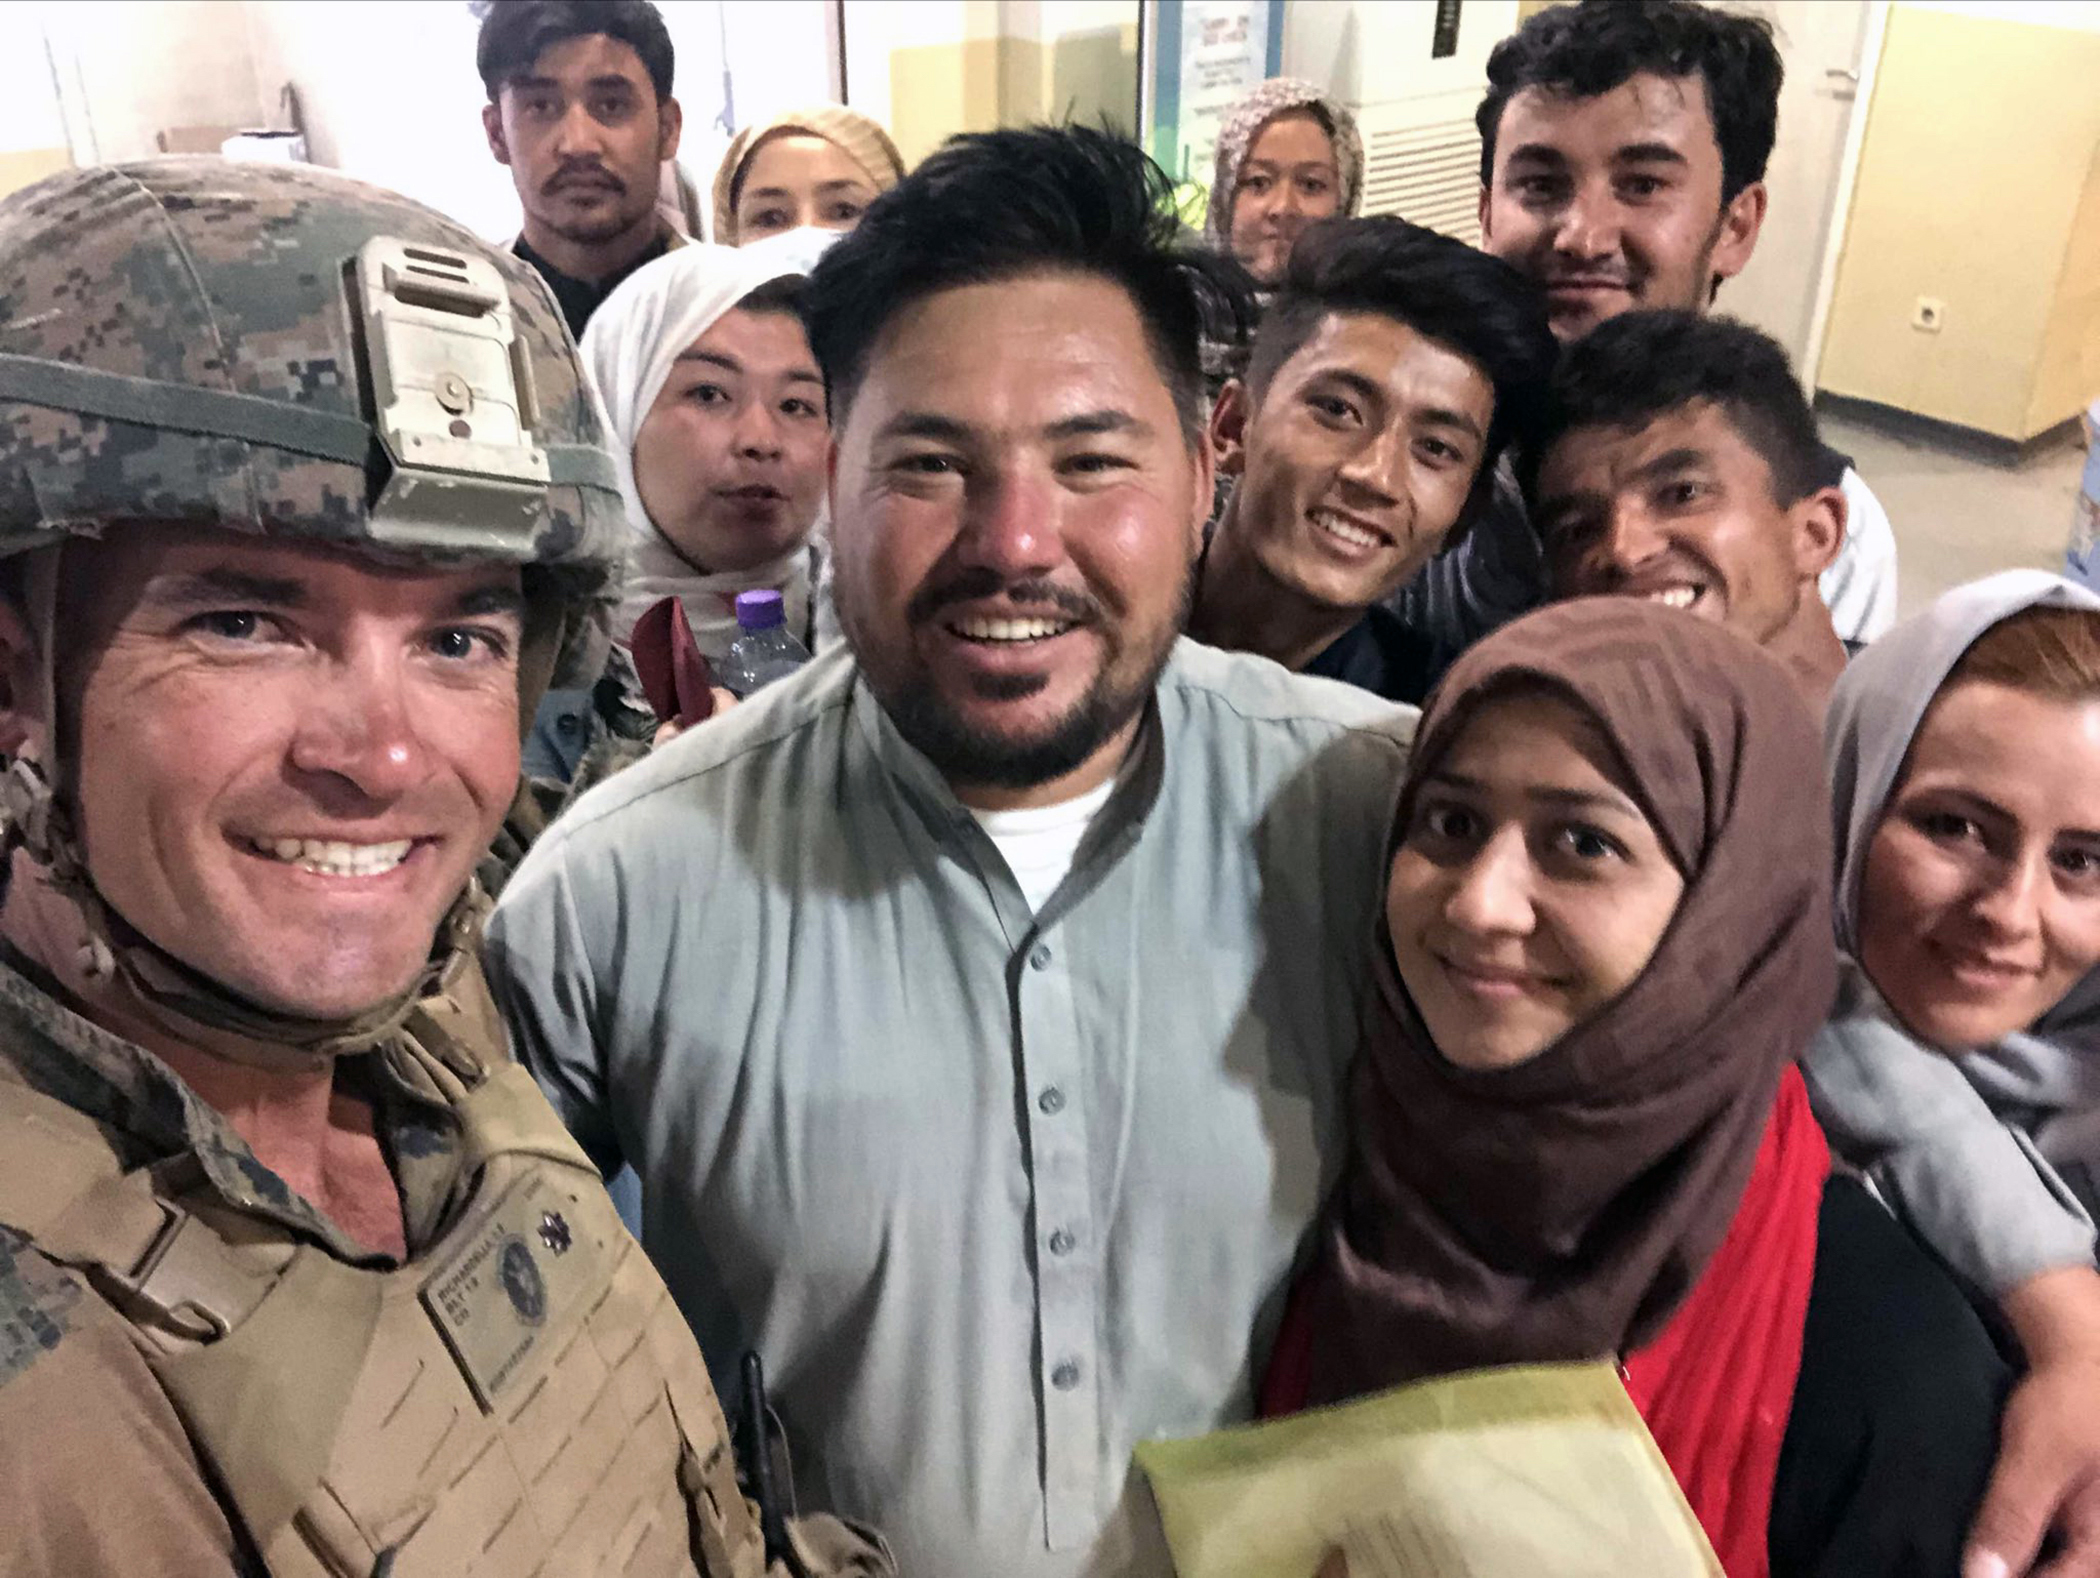 Photograph of a group of evacuees from Afghanistan standing beside a soldier. Shah and Forozan stand beside Richardella (the solider) in the foreground, and eight unnamed evacuees stand in the background. All look to the camera.